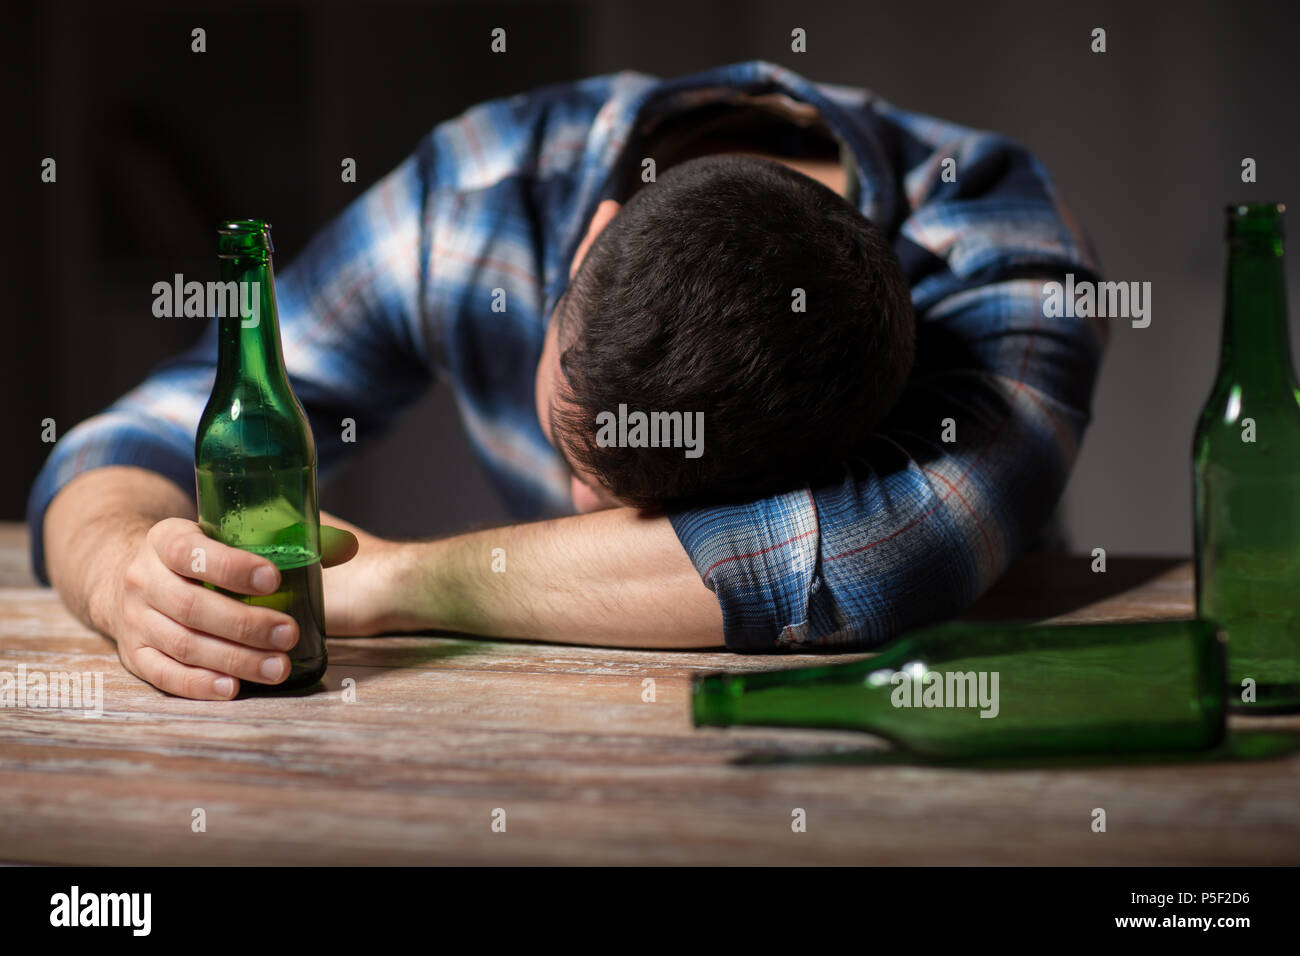 drunk man with beer bottles on table at night Stock Photo